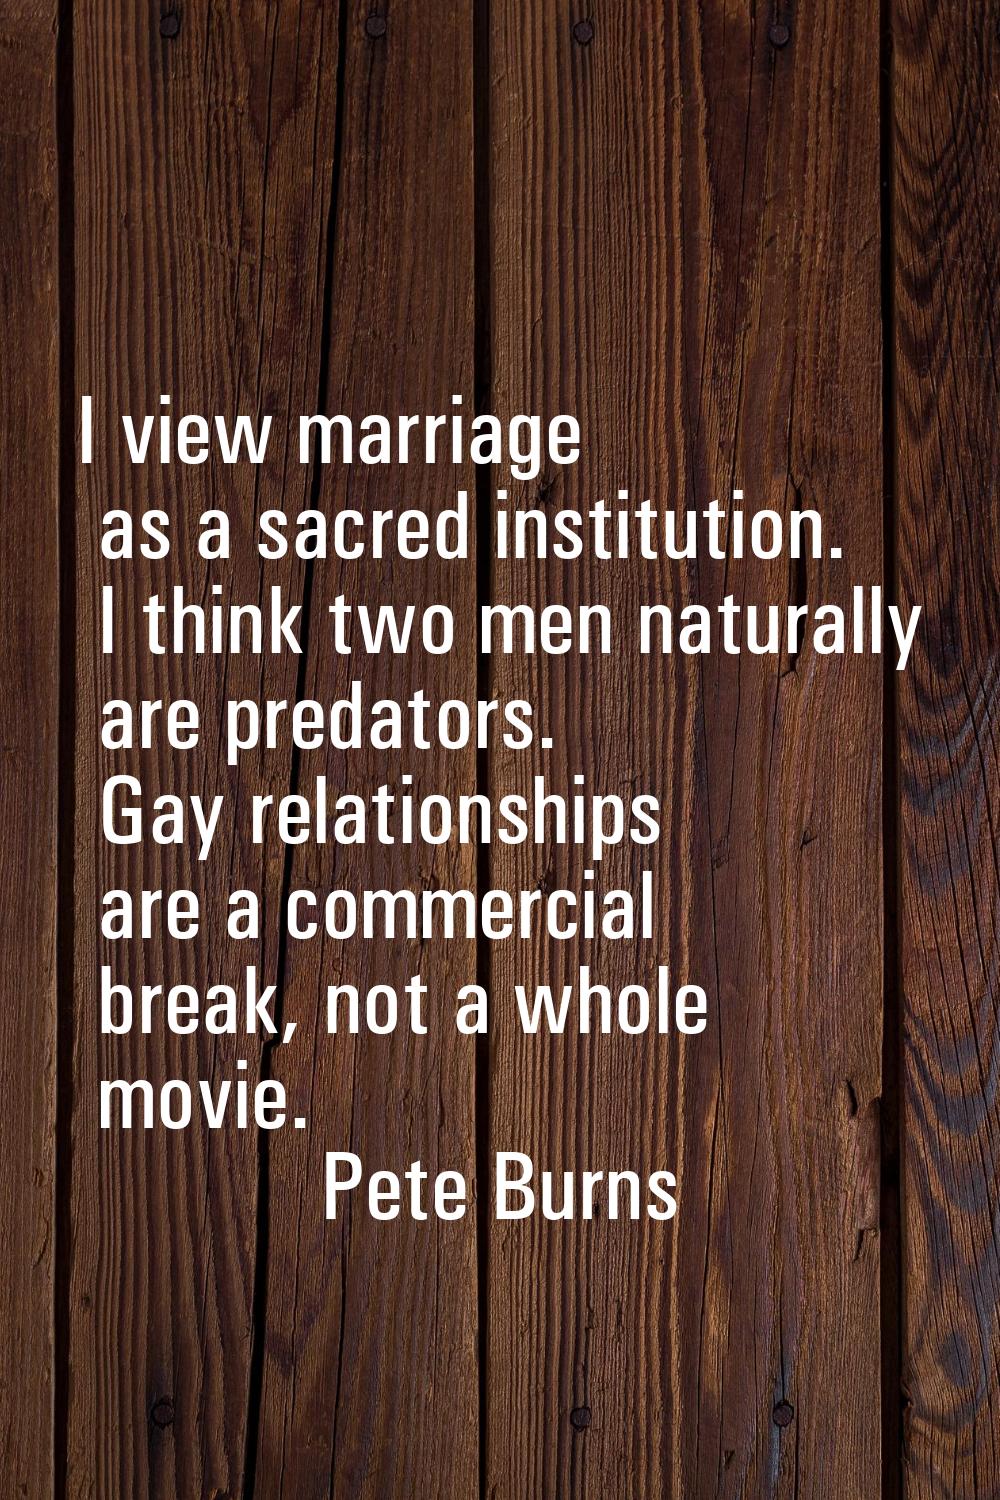 I view marriage as a sacred institution. I think two men naturally are predators. Gay relationships